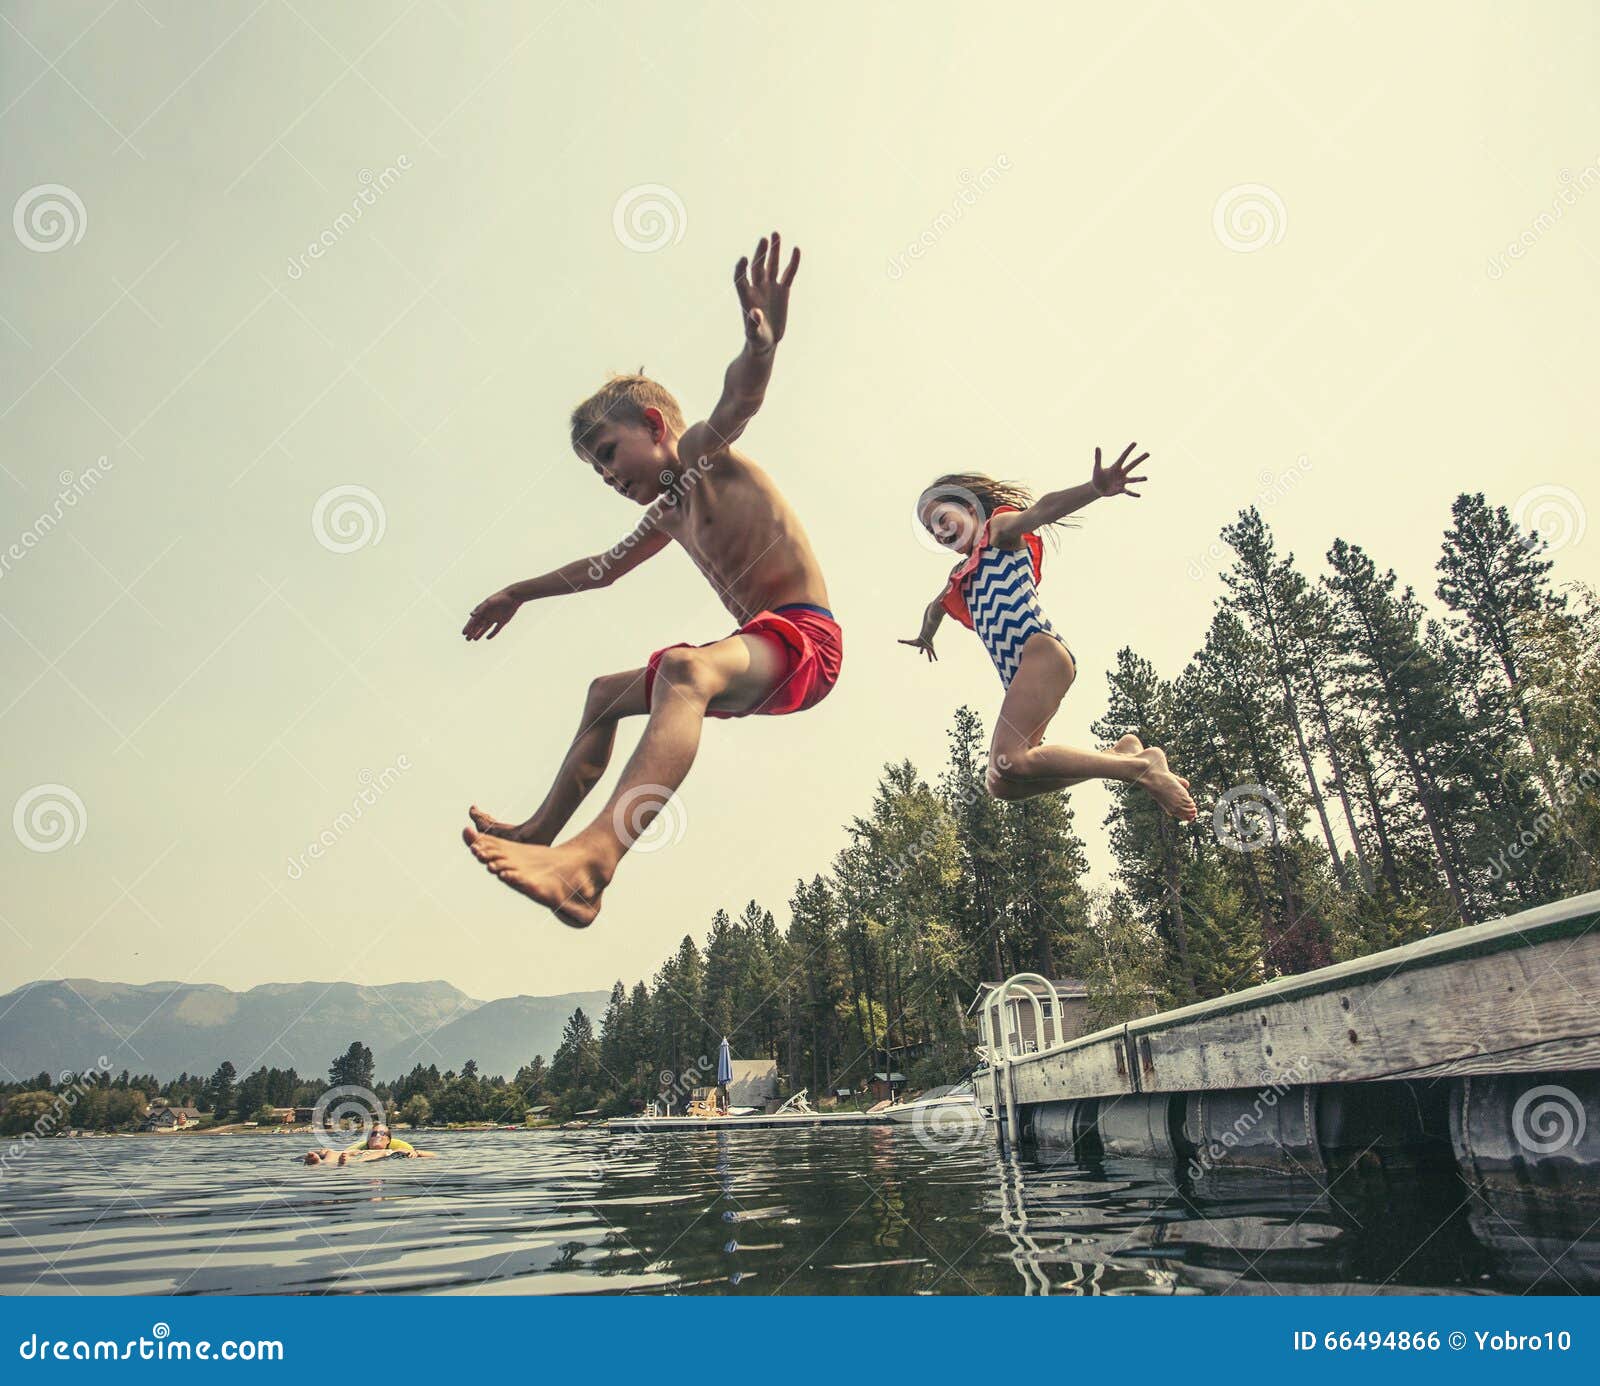 kids jumping off the dock into a beautiful mountain lake